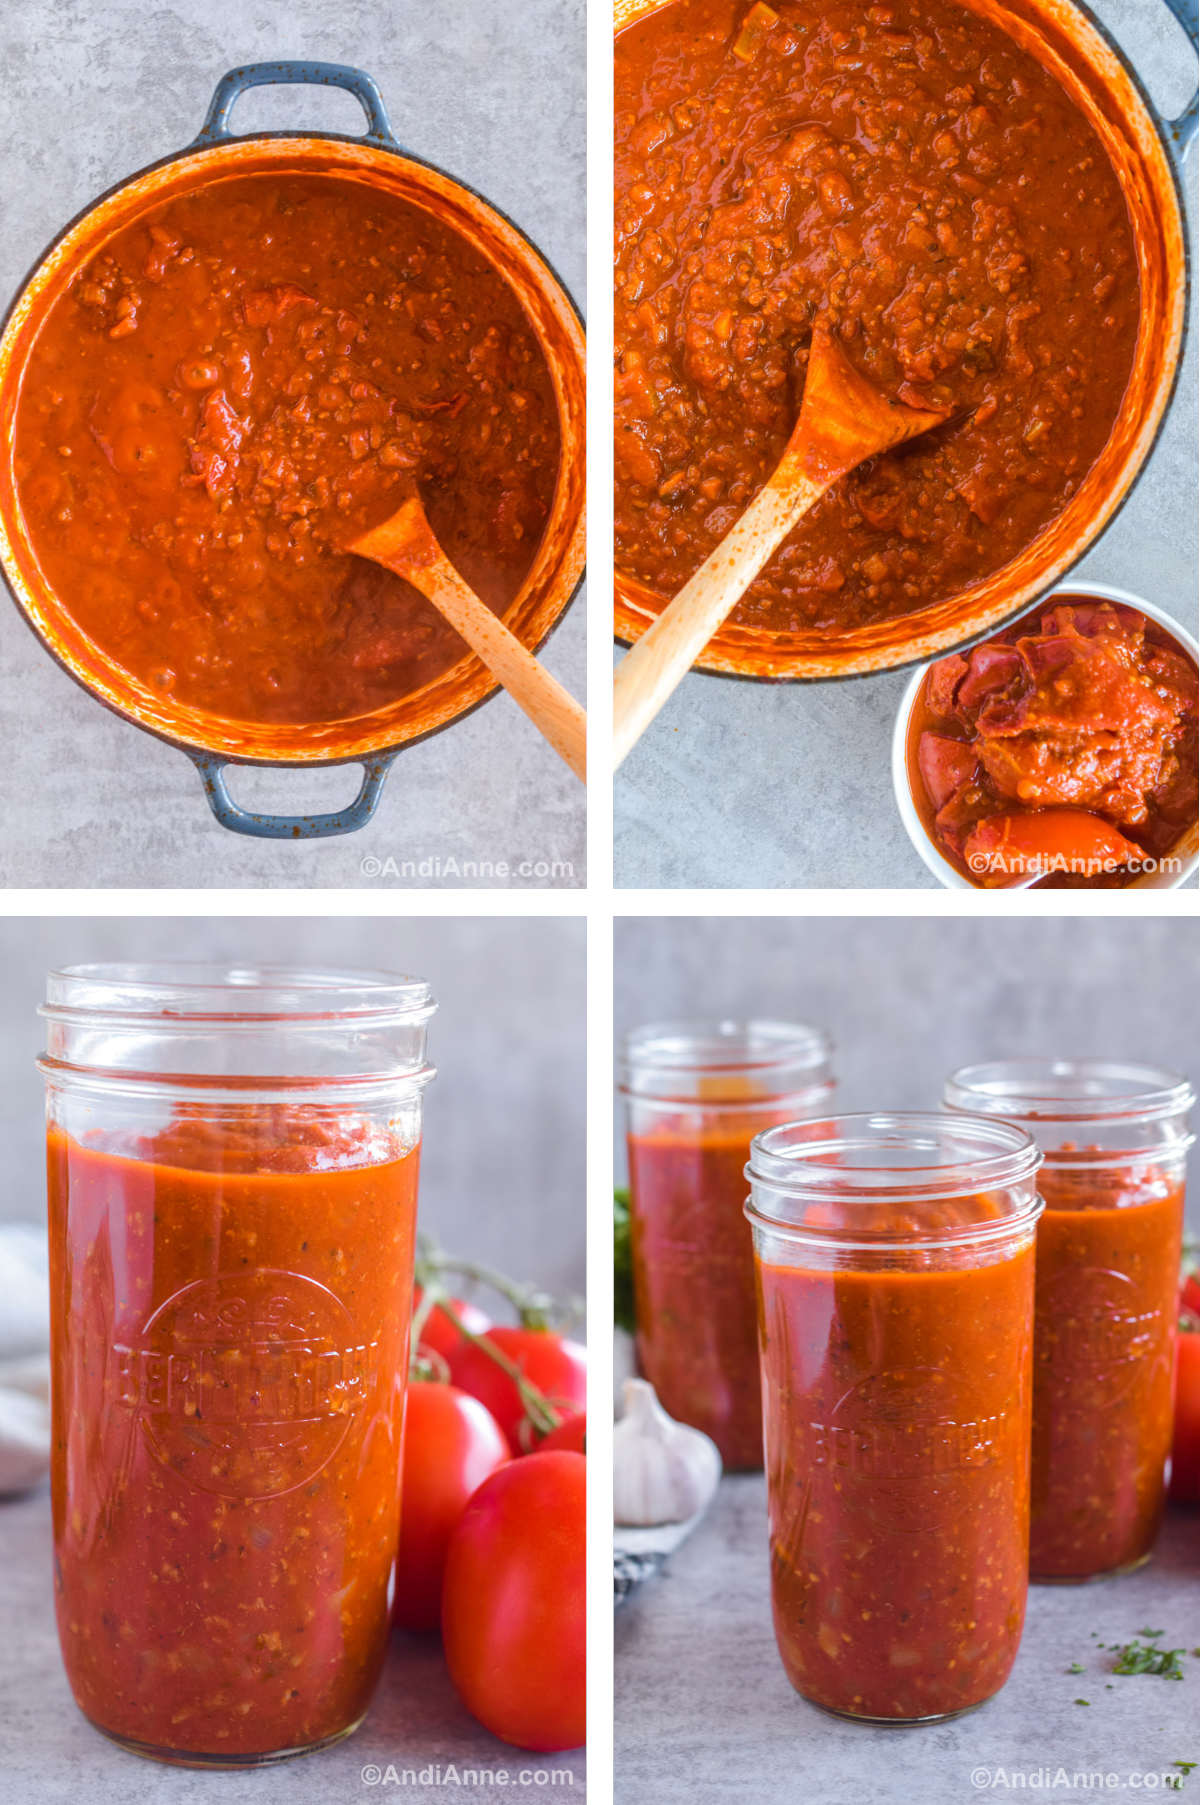 Four images in one: 1. All ingredients fully cooked and mixed in pot. 2. Closeup of finished sauce, tomato skins and cores in a separate bowl. 3. Mason jar filled with sauce. 4. Three mason jars filled with sauce. 